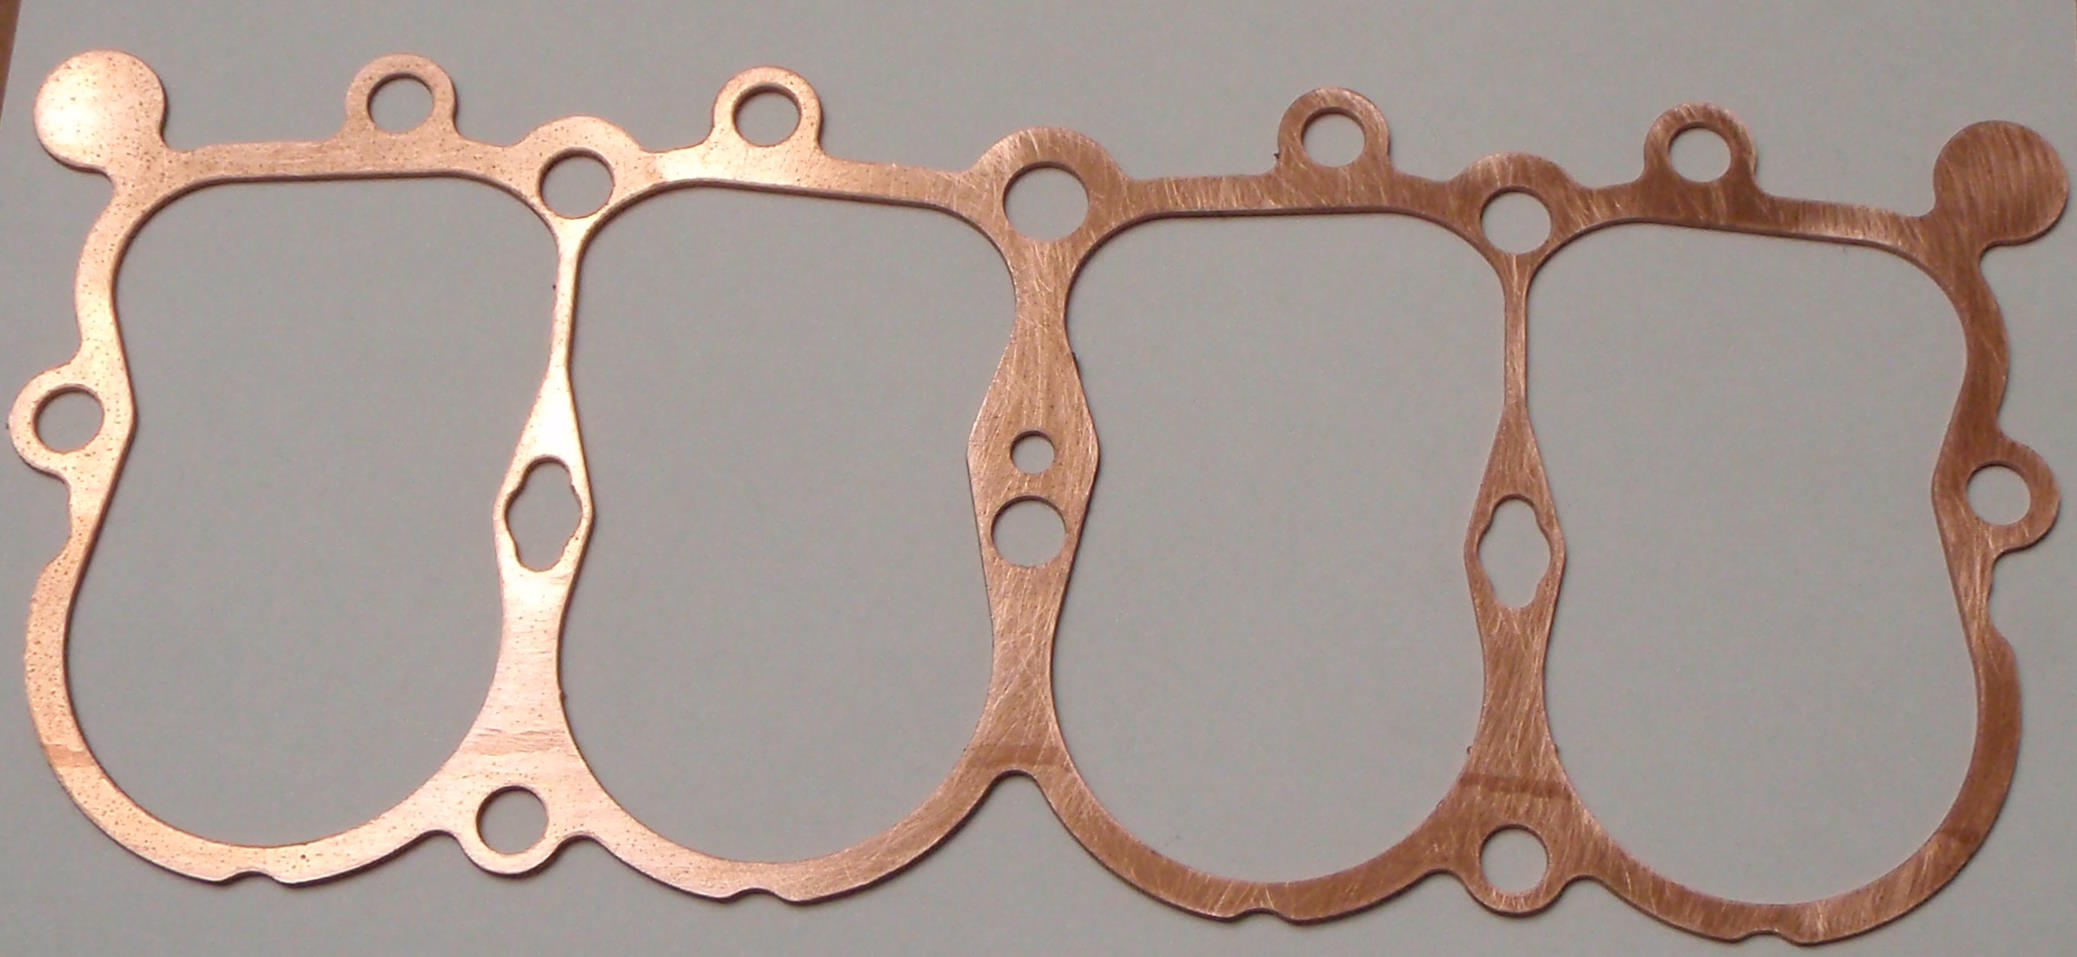 Copper gasket for cosworth engine